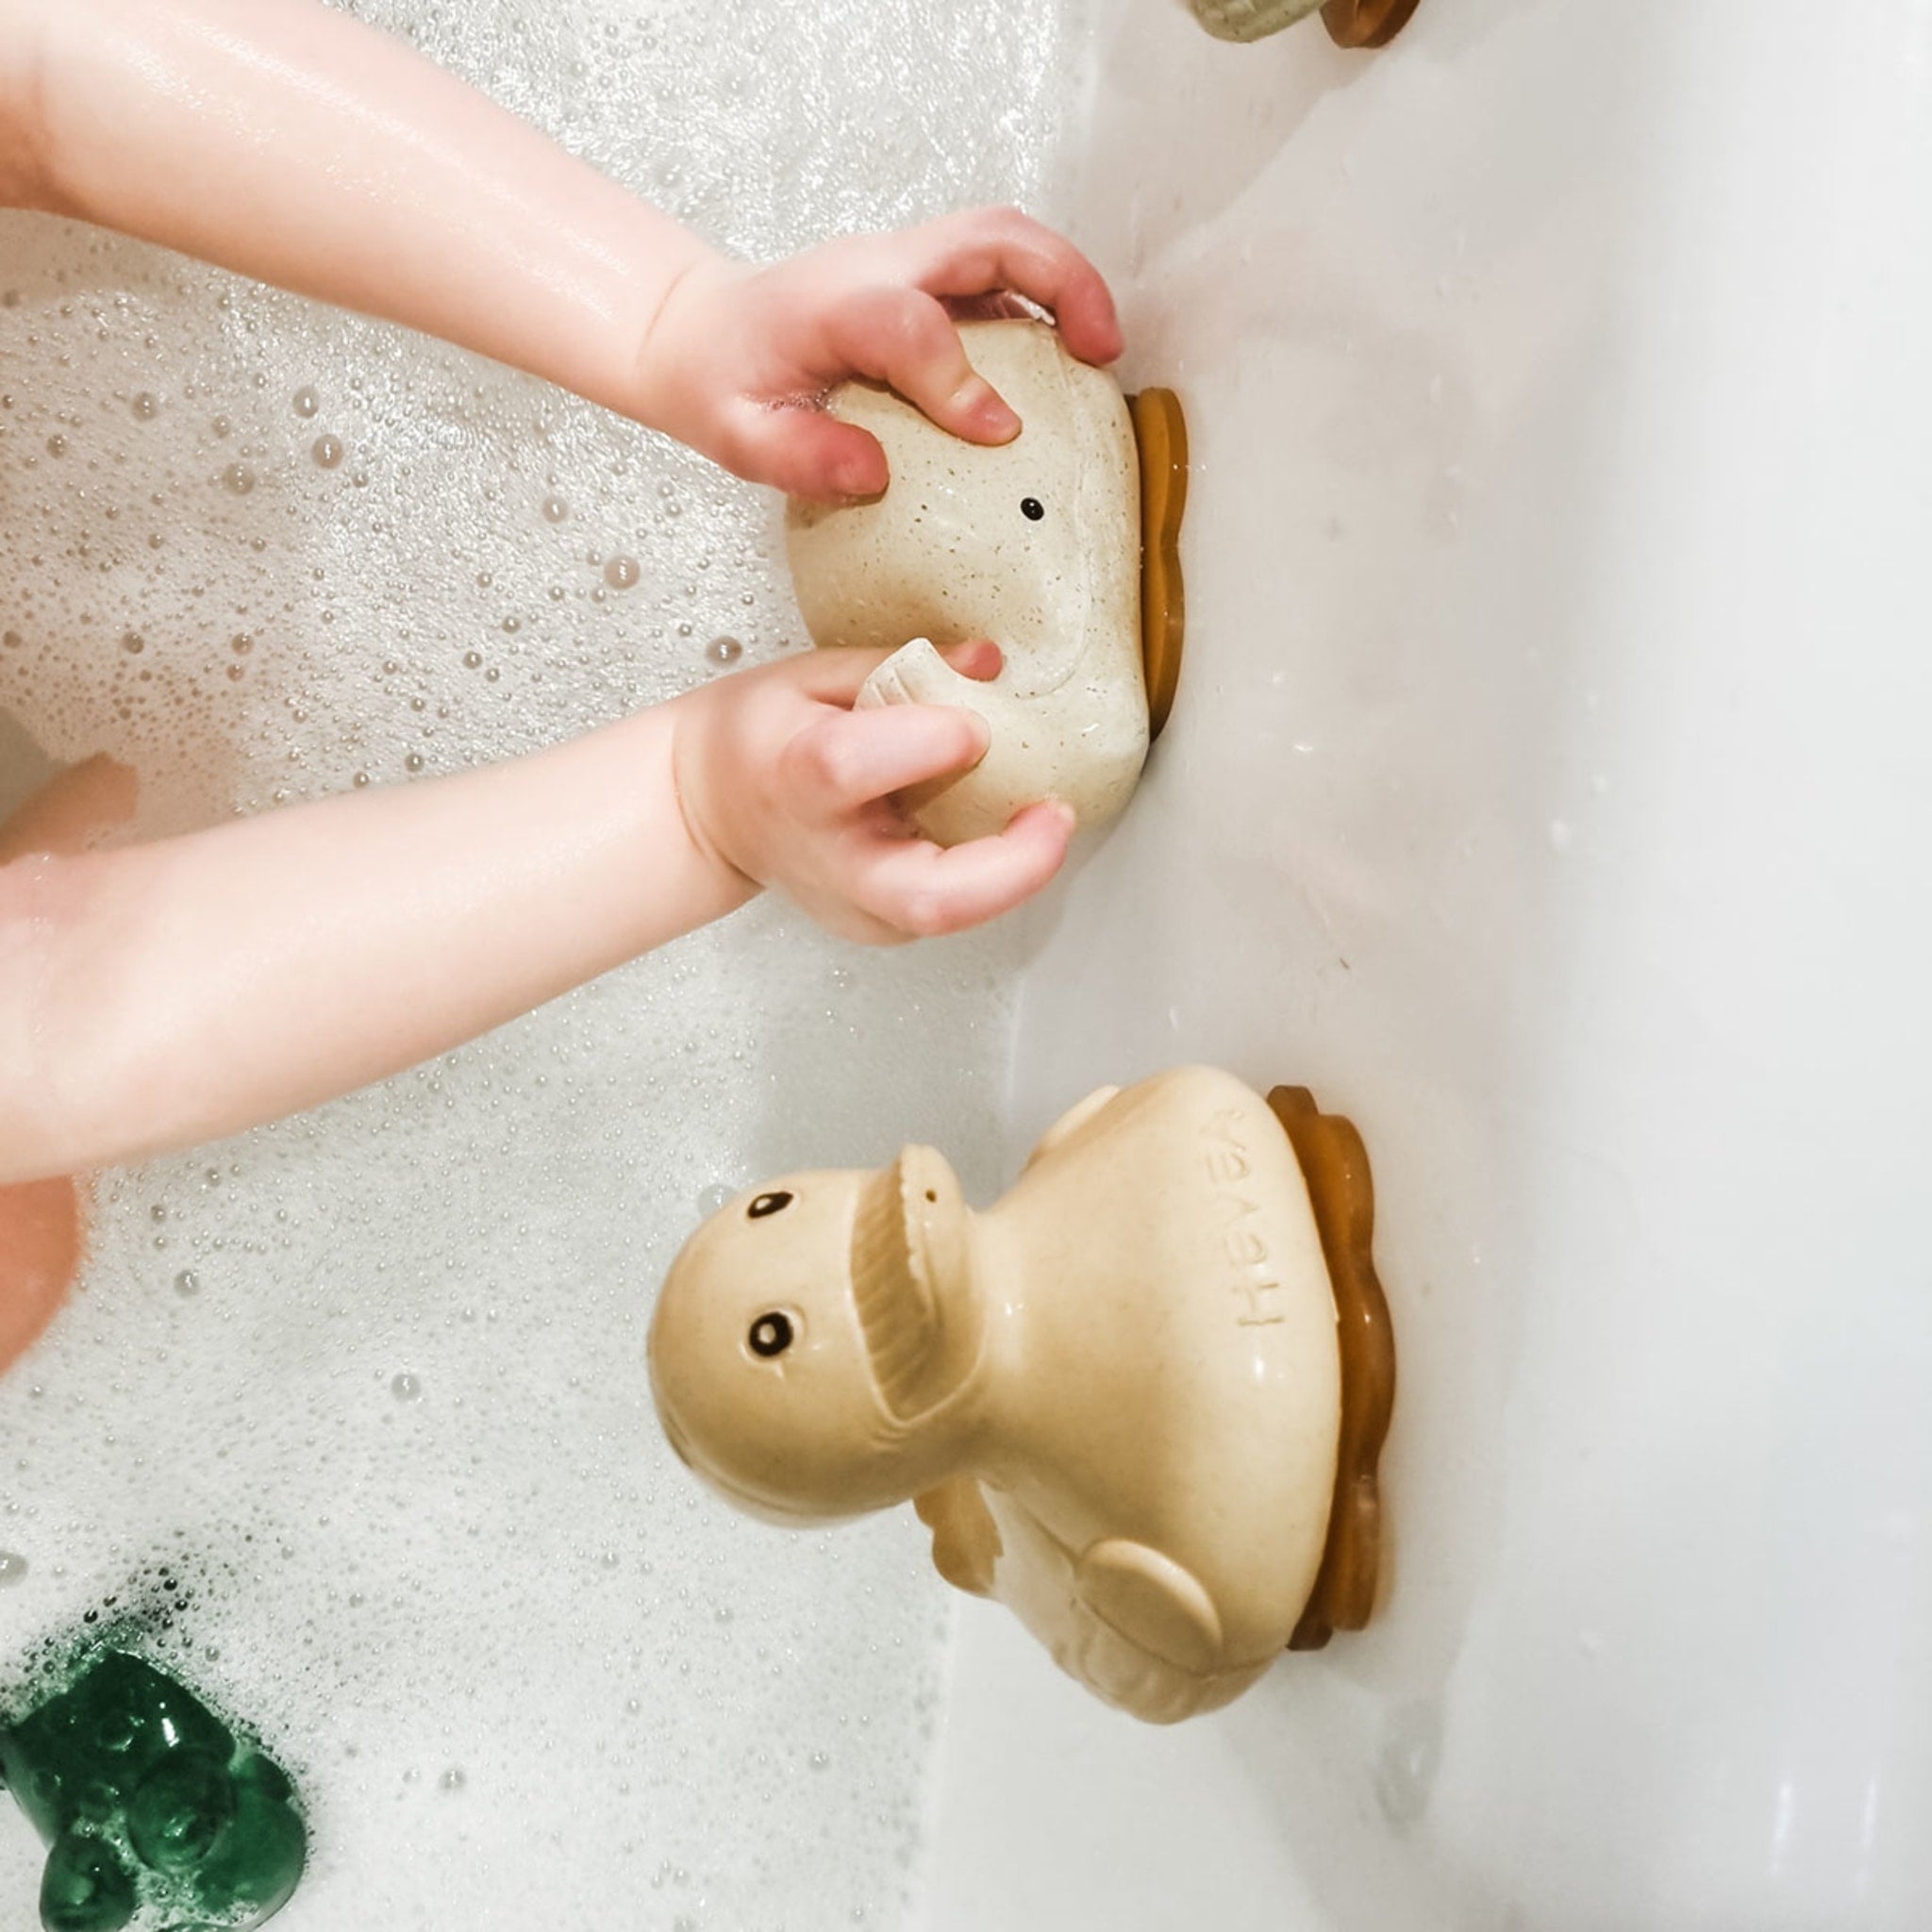 Study Finds Bacteria In Nearly Every Bath Toy